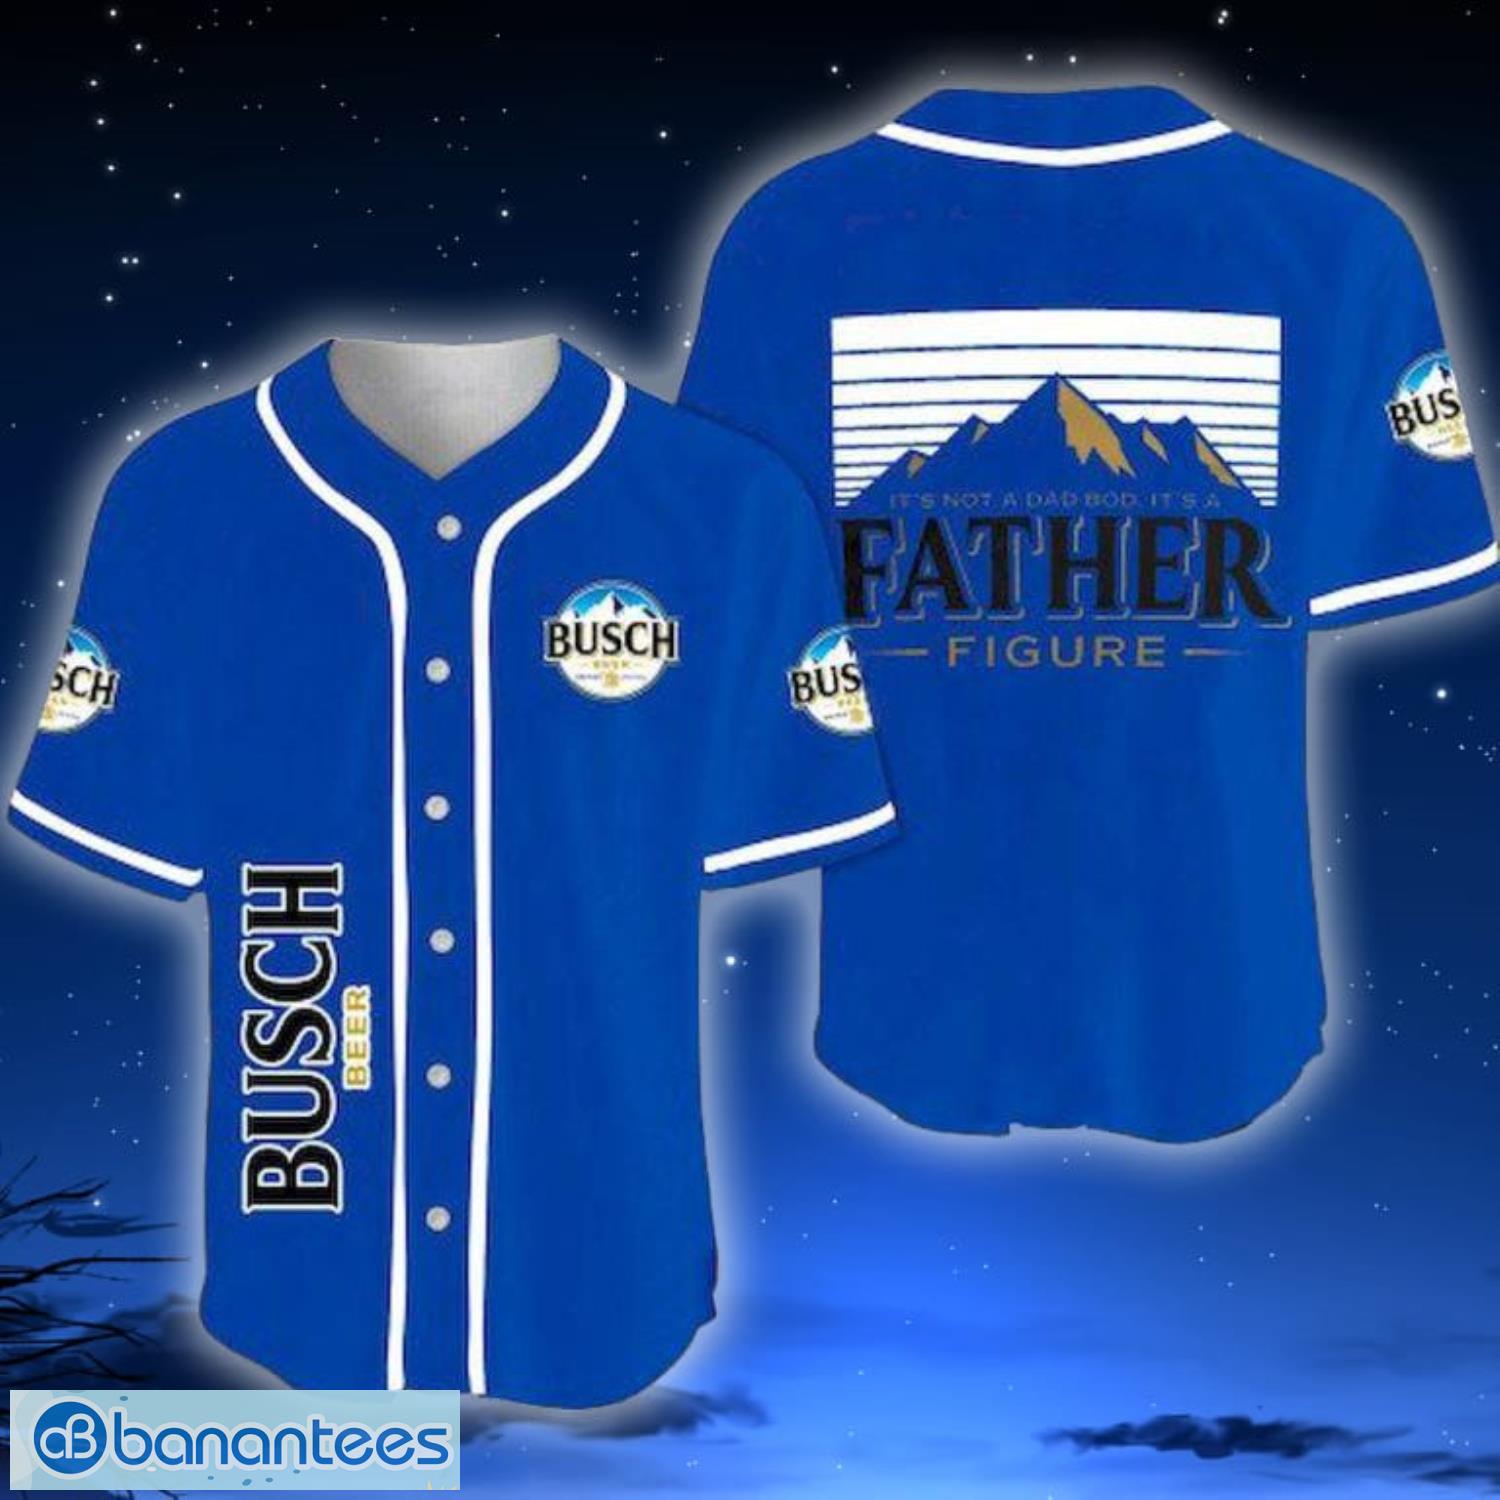 Busch Beer, It's Not A Dad Bod It Is A Father Figure, Father's Day Gift  Baseball Jersey Shirt - Banantees